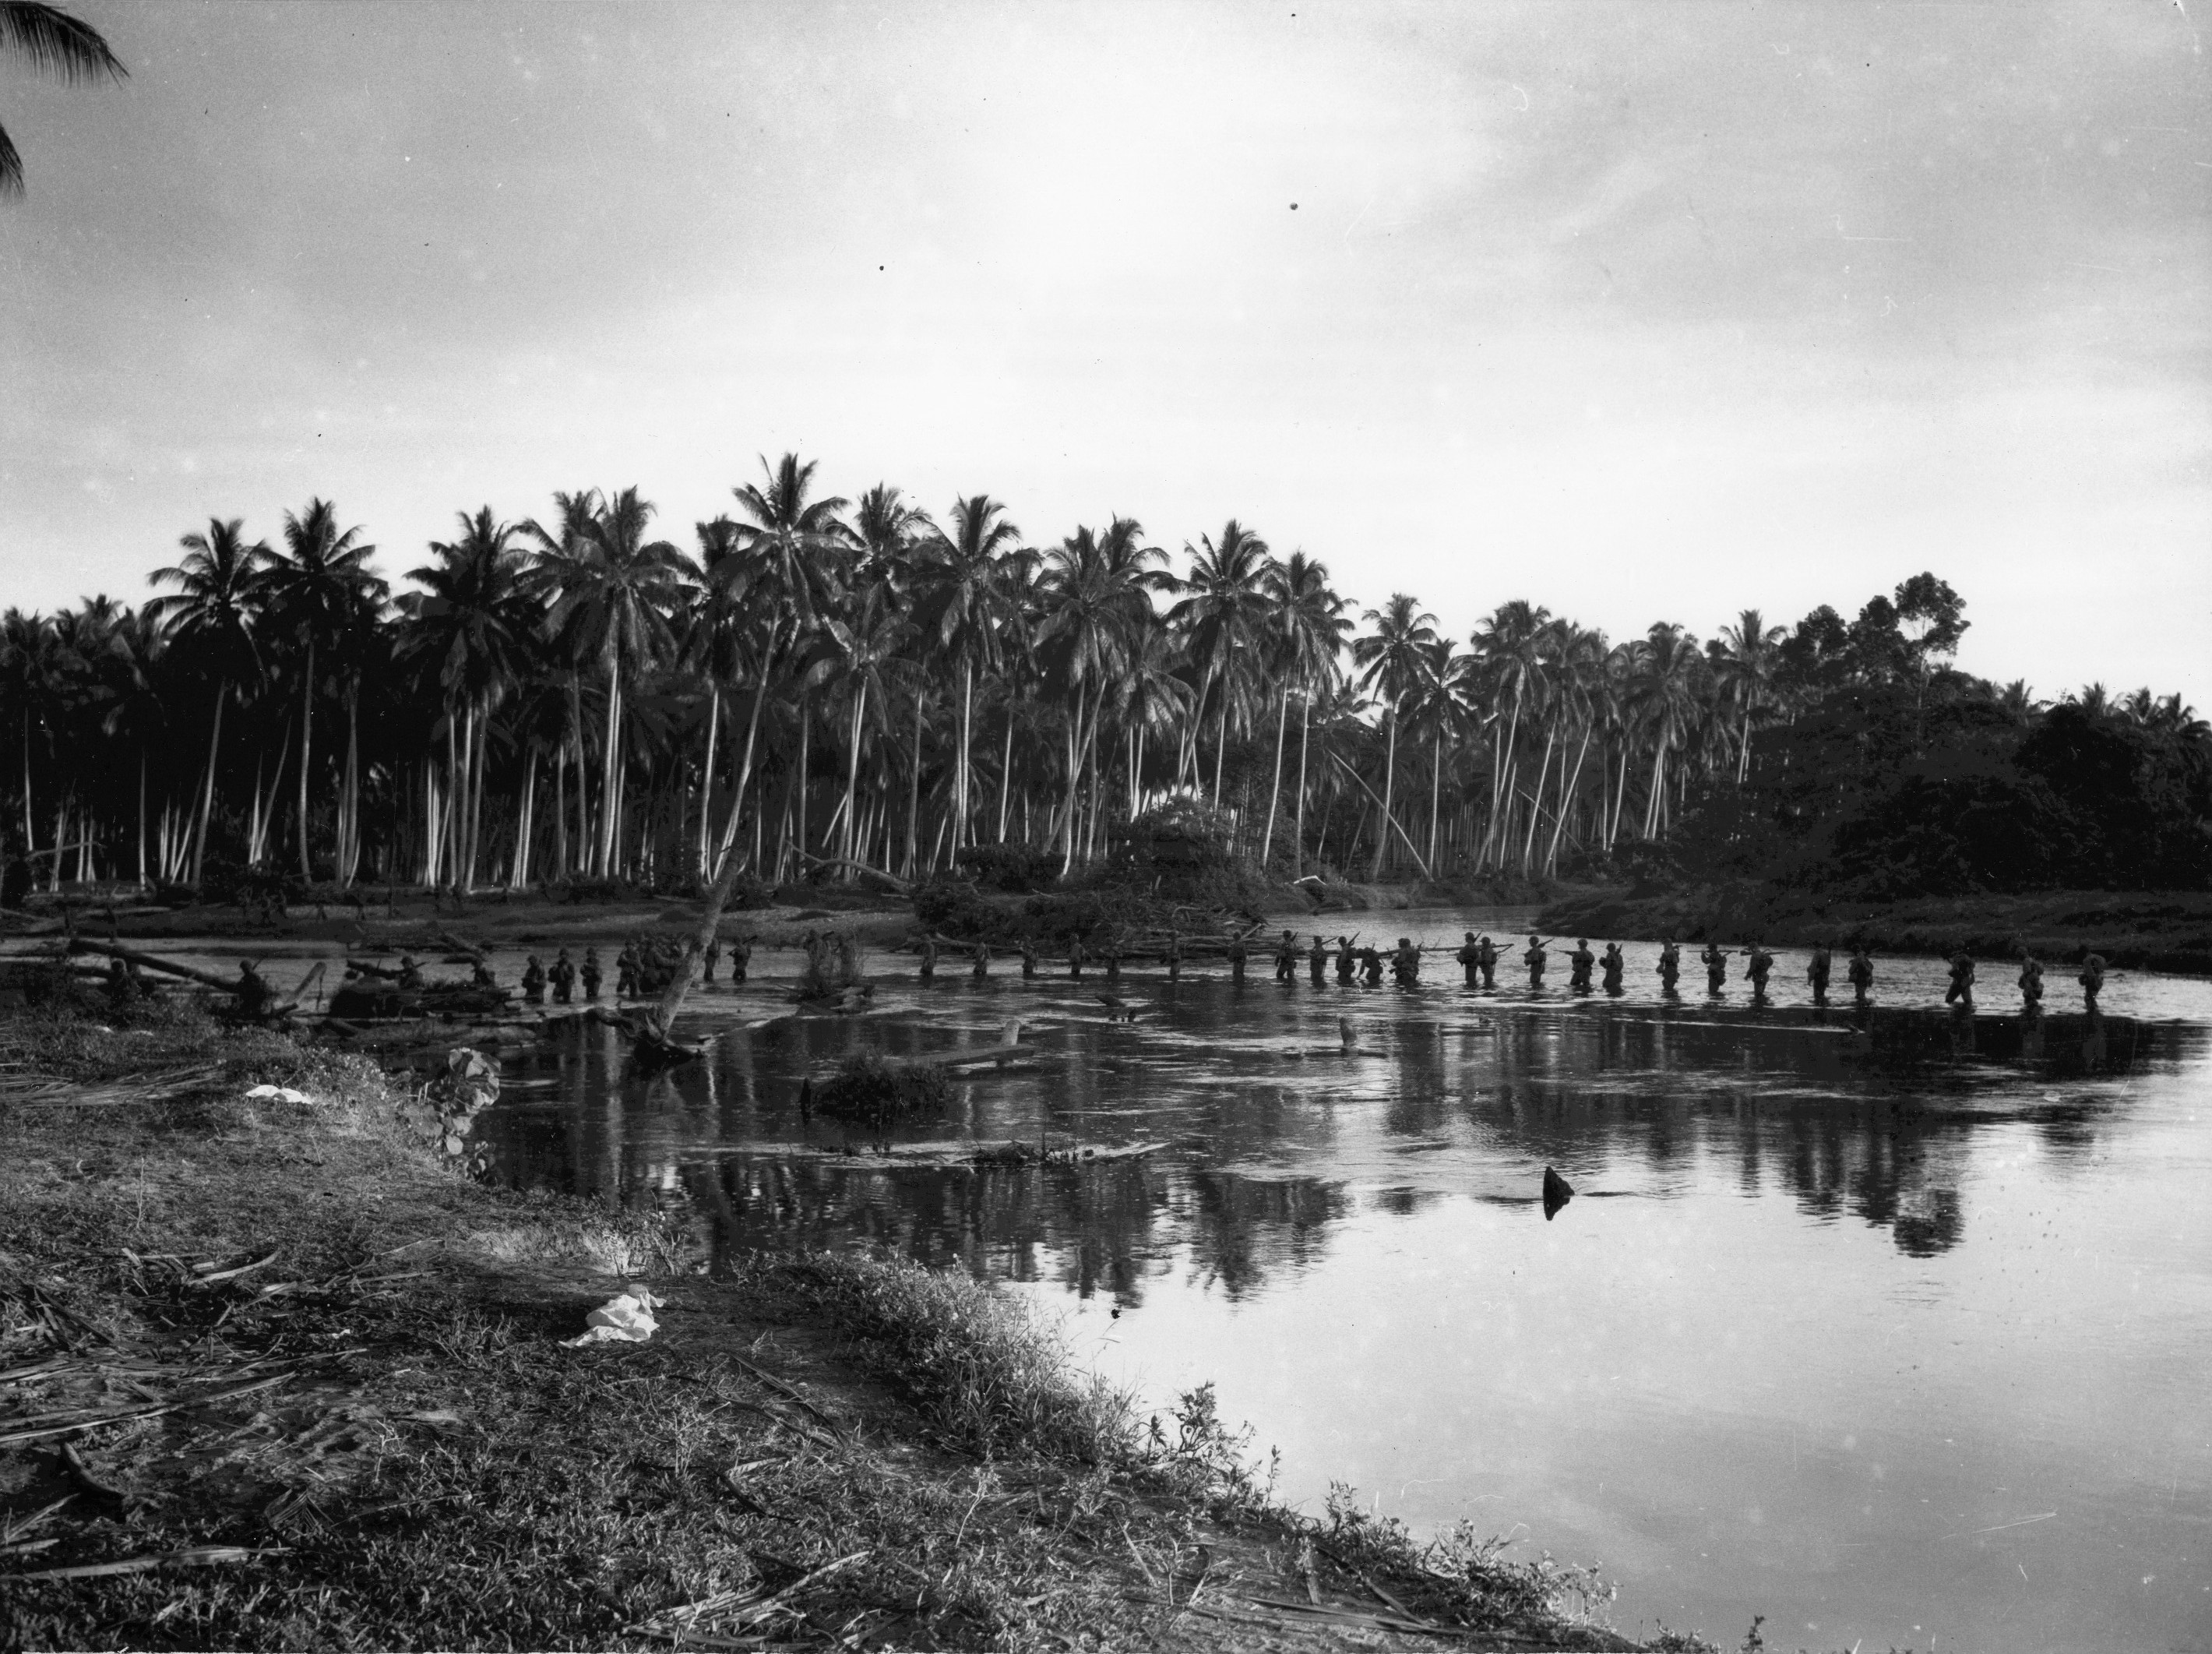 Men of US 2nd Marine Division wading through shallow water, Guadalcanal, Solomon Islands, Aug 1942